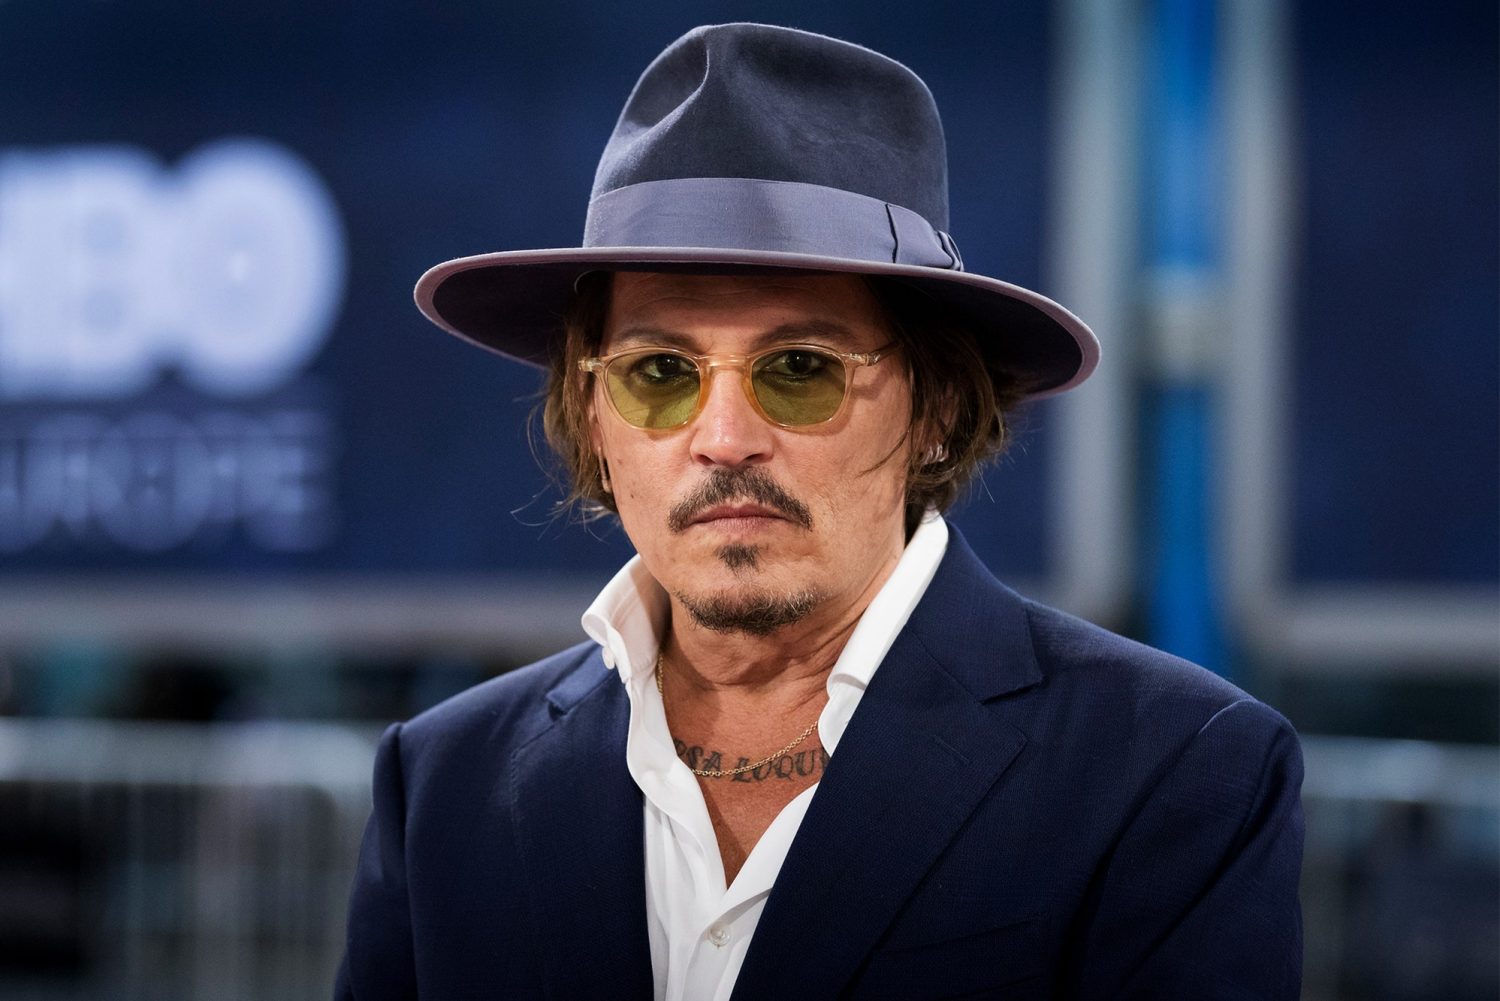 Johnny Depp's Nfts Sell For $800k And He Donates Money To Charity Amber Heard Broke Promise To